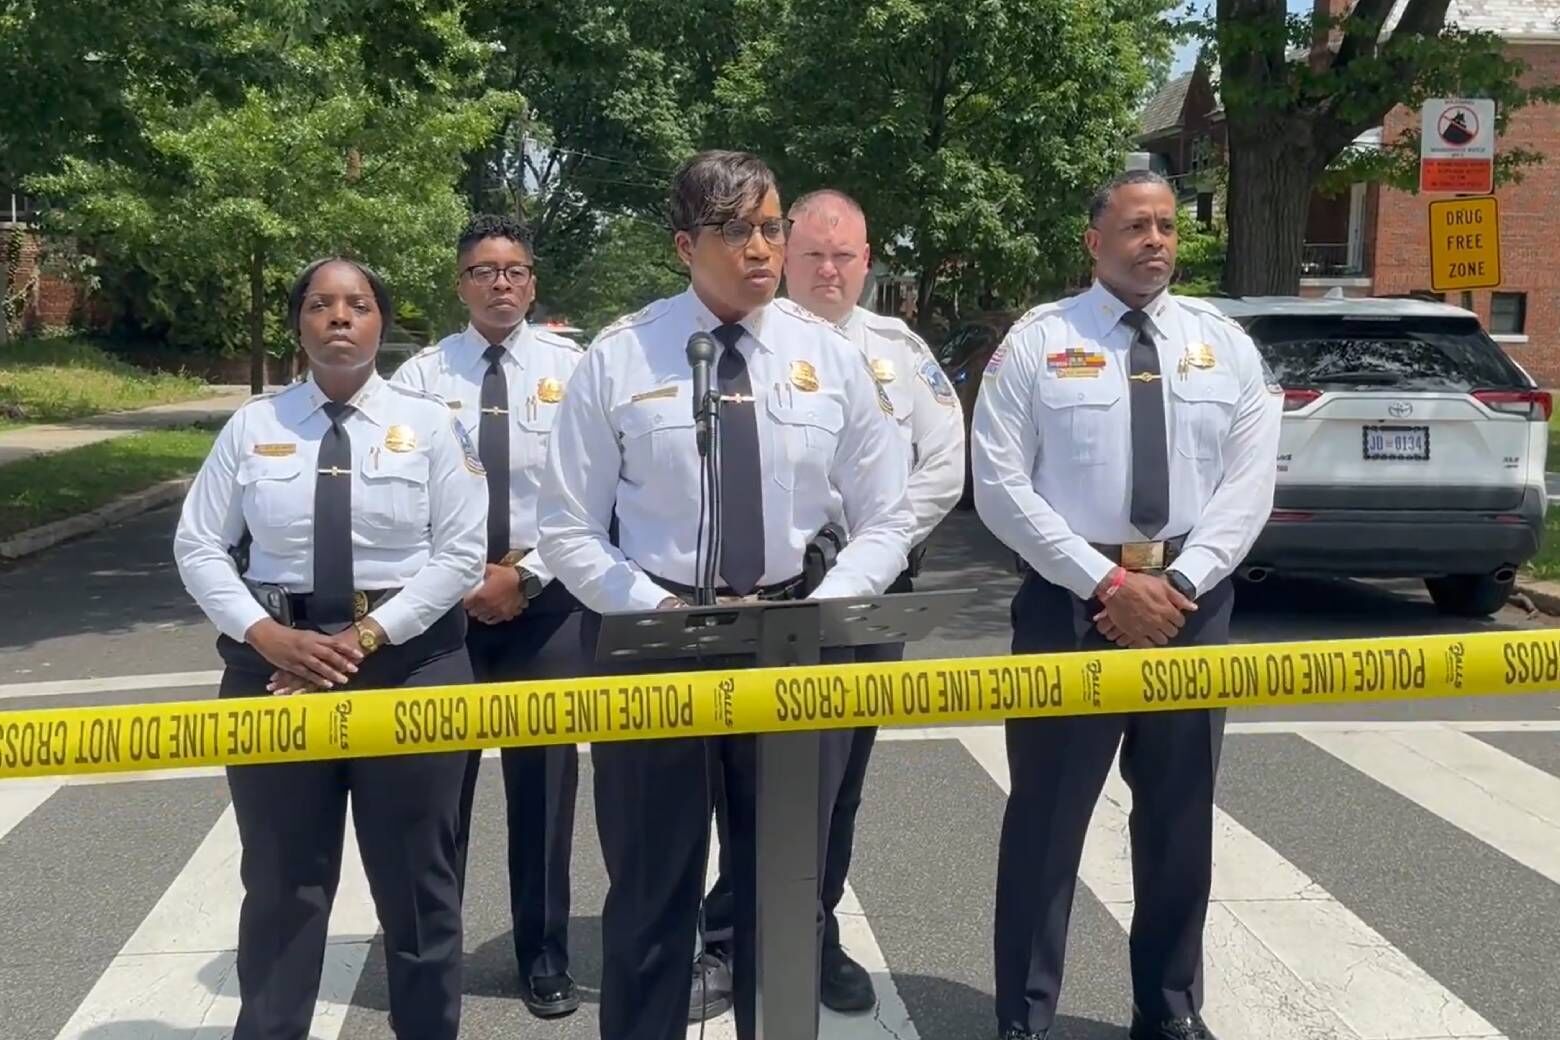 D.C. police Chief Pamela Smith gives an update from the scene of the shooting. (Courtesy D.C. police)